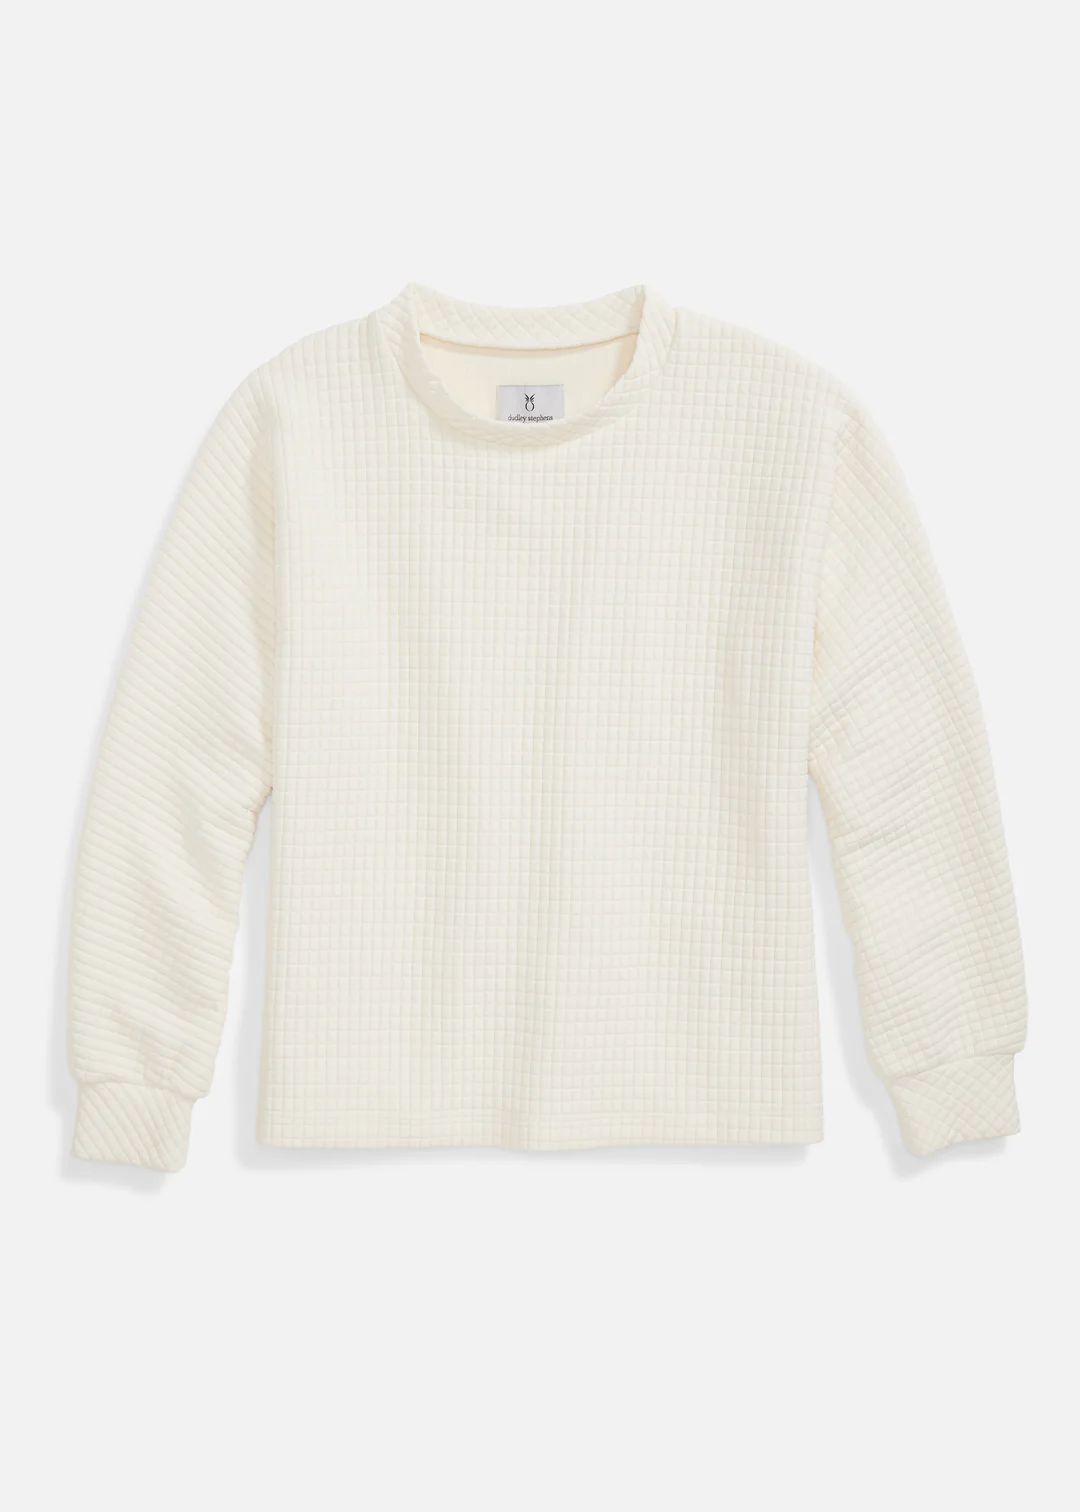 P'town Pullover in Waffle (Cream) | Dudley Stephens